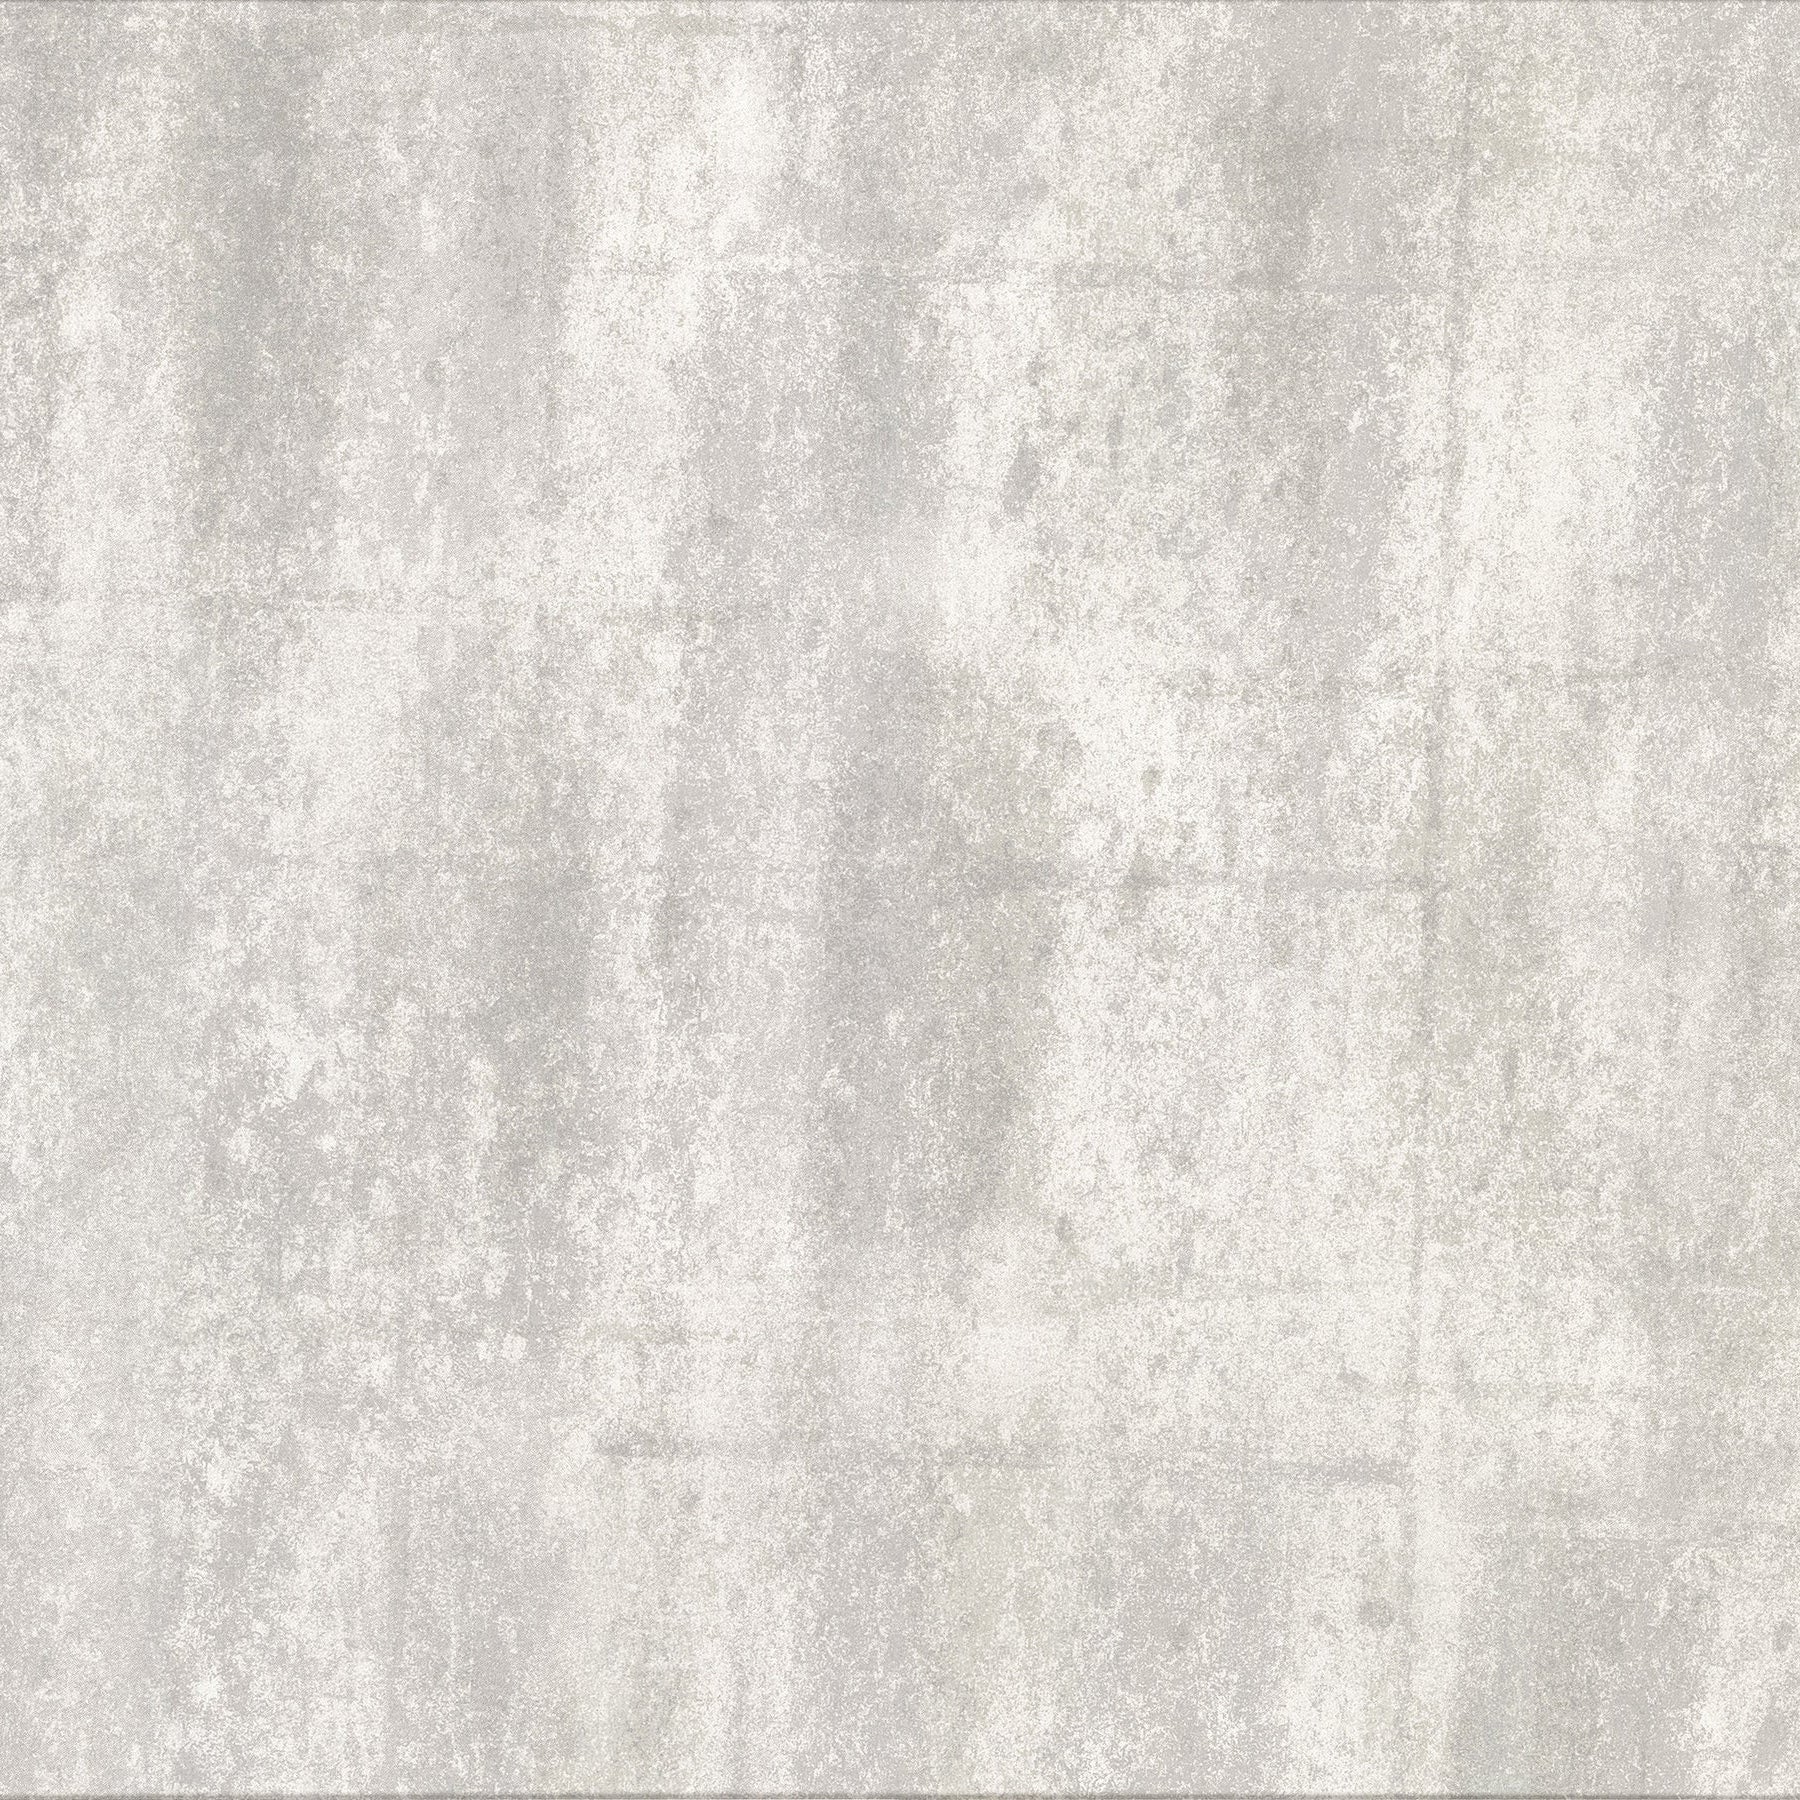 Purchase 2909-MLC-123 Riva Pollit Off-White Distressed Texture Brewster Wallpaper